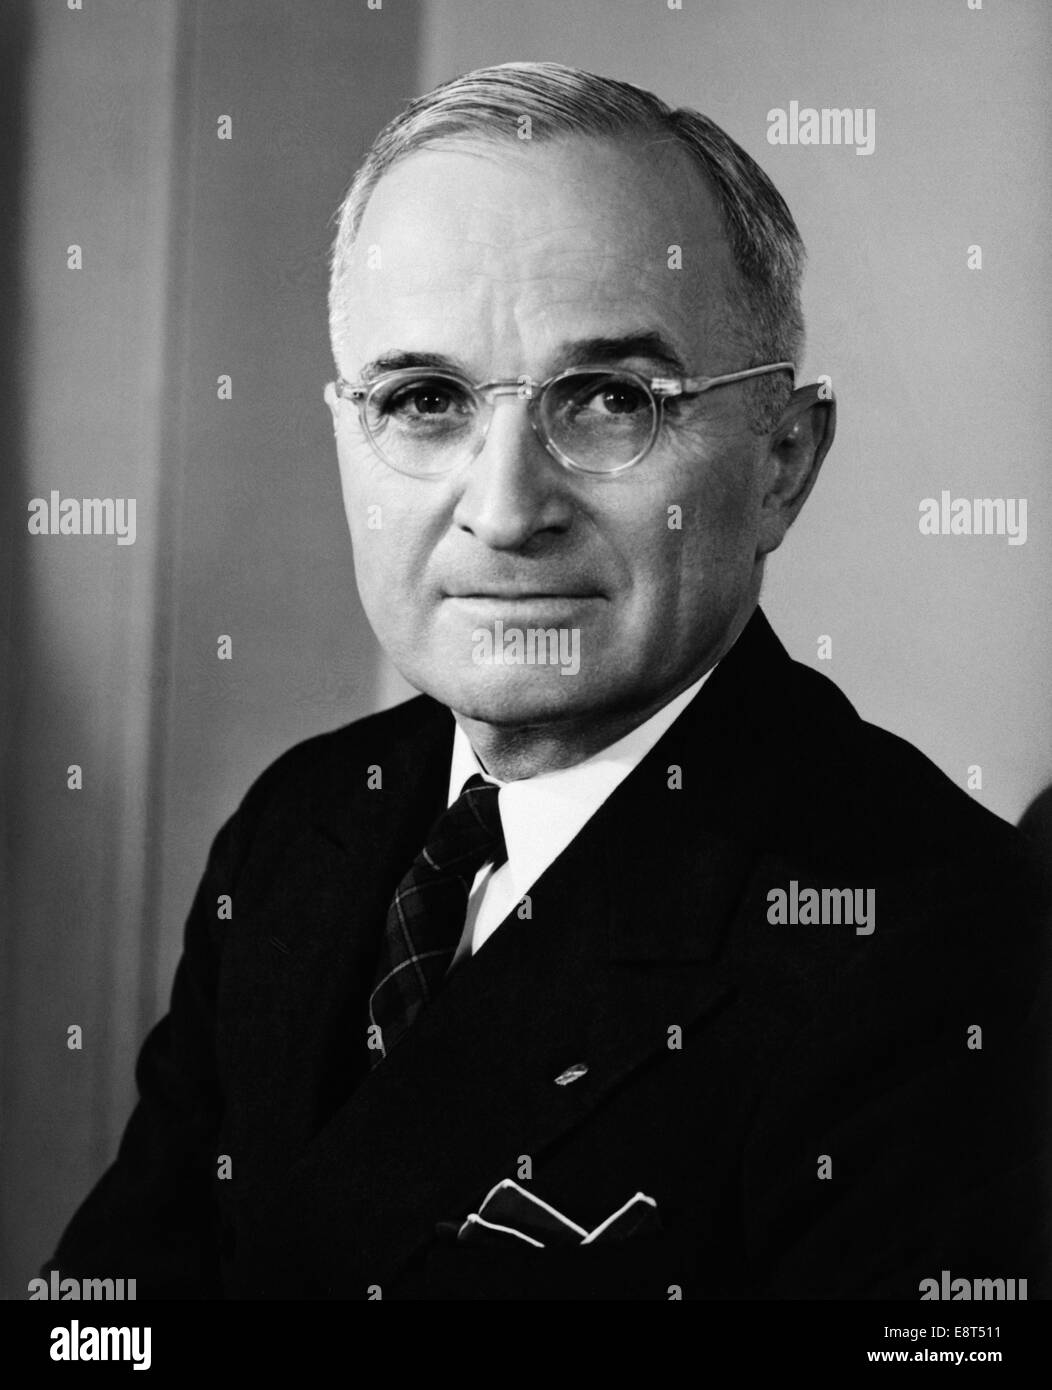 1940s PORTRAIT HARRY S. TRUMAN 33rd AMERICAN PRESIDENT PORTRAIT LOOKING AT CAMERA Stock Photo